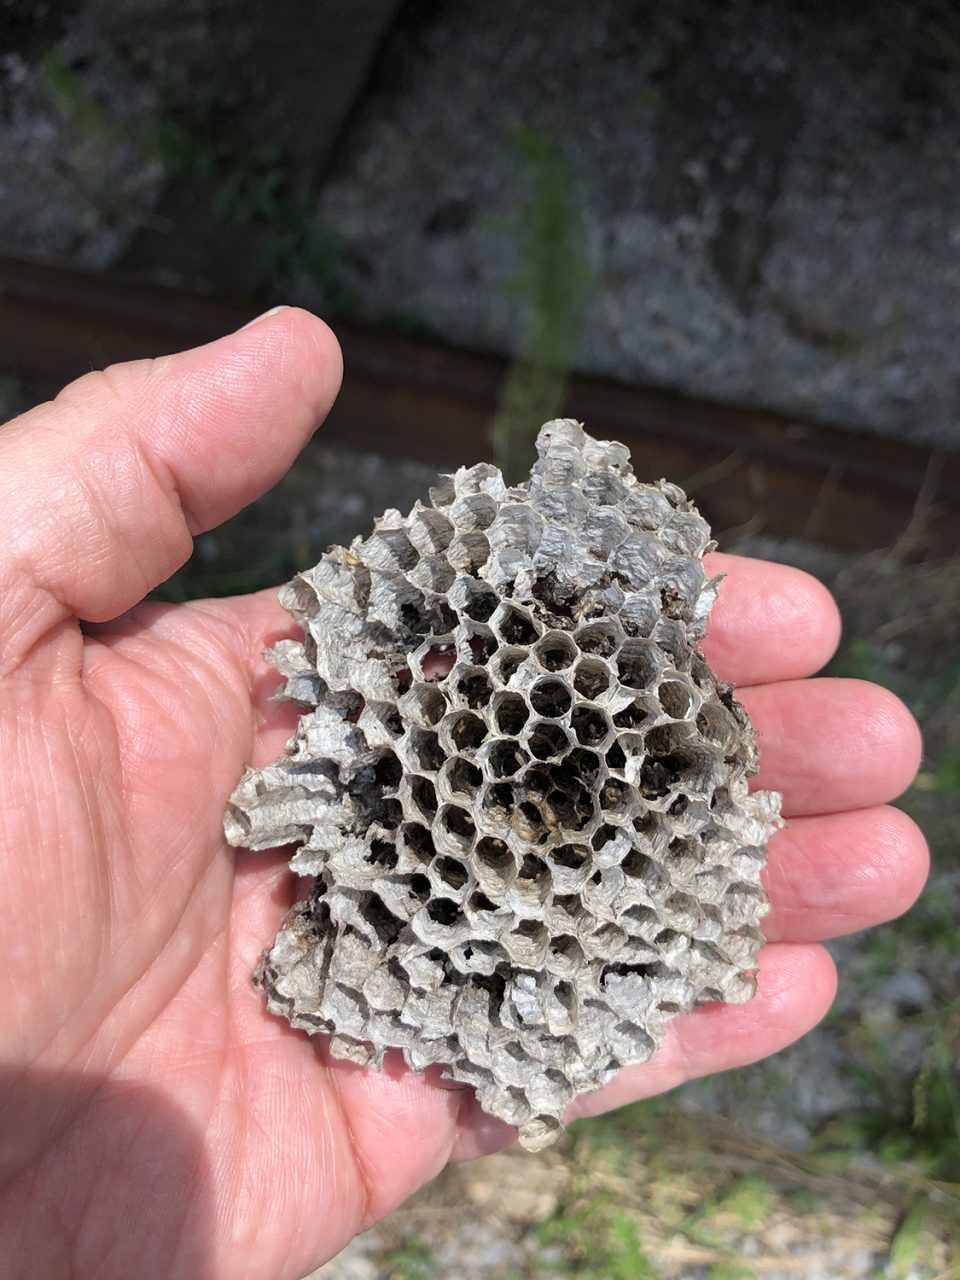 Bonus: I found this abandoned treasure -- a wasp nest -- laying on the tracks. It came home for further photographic exploration later.